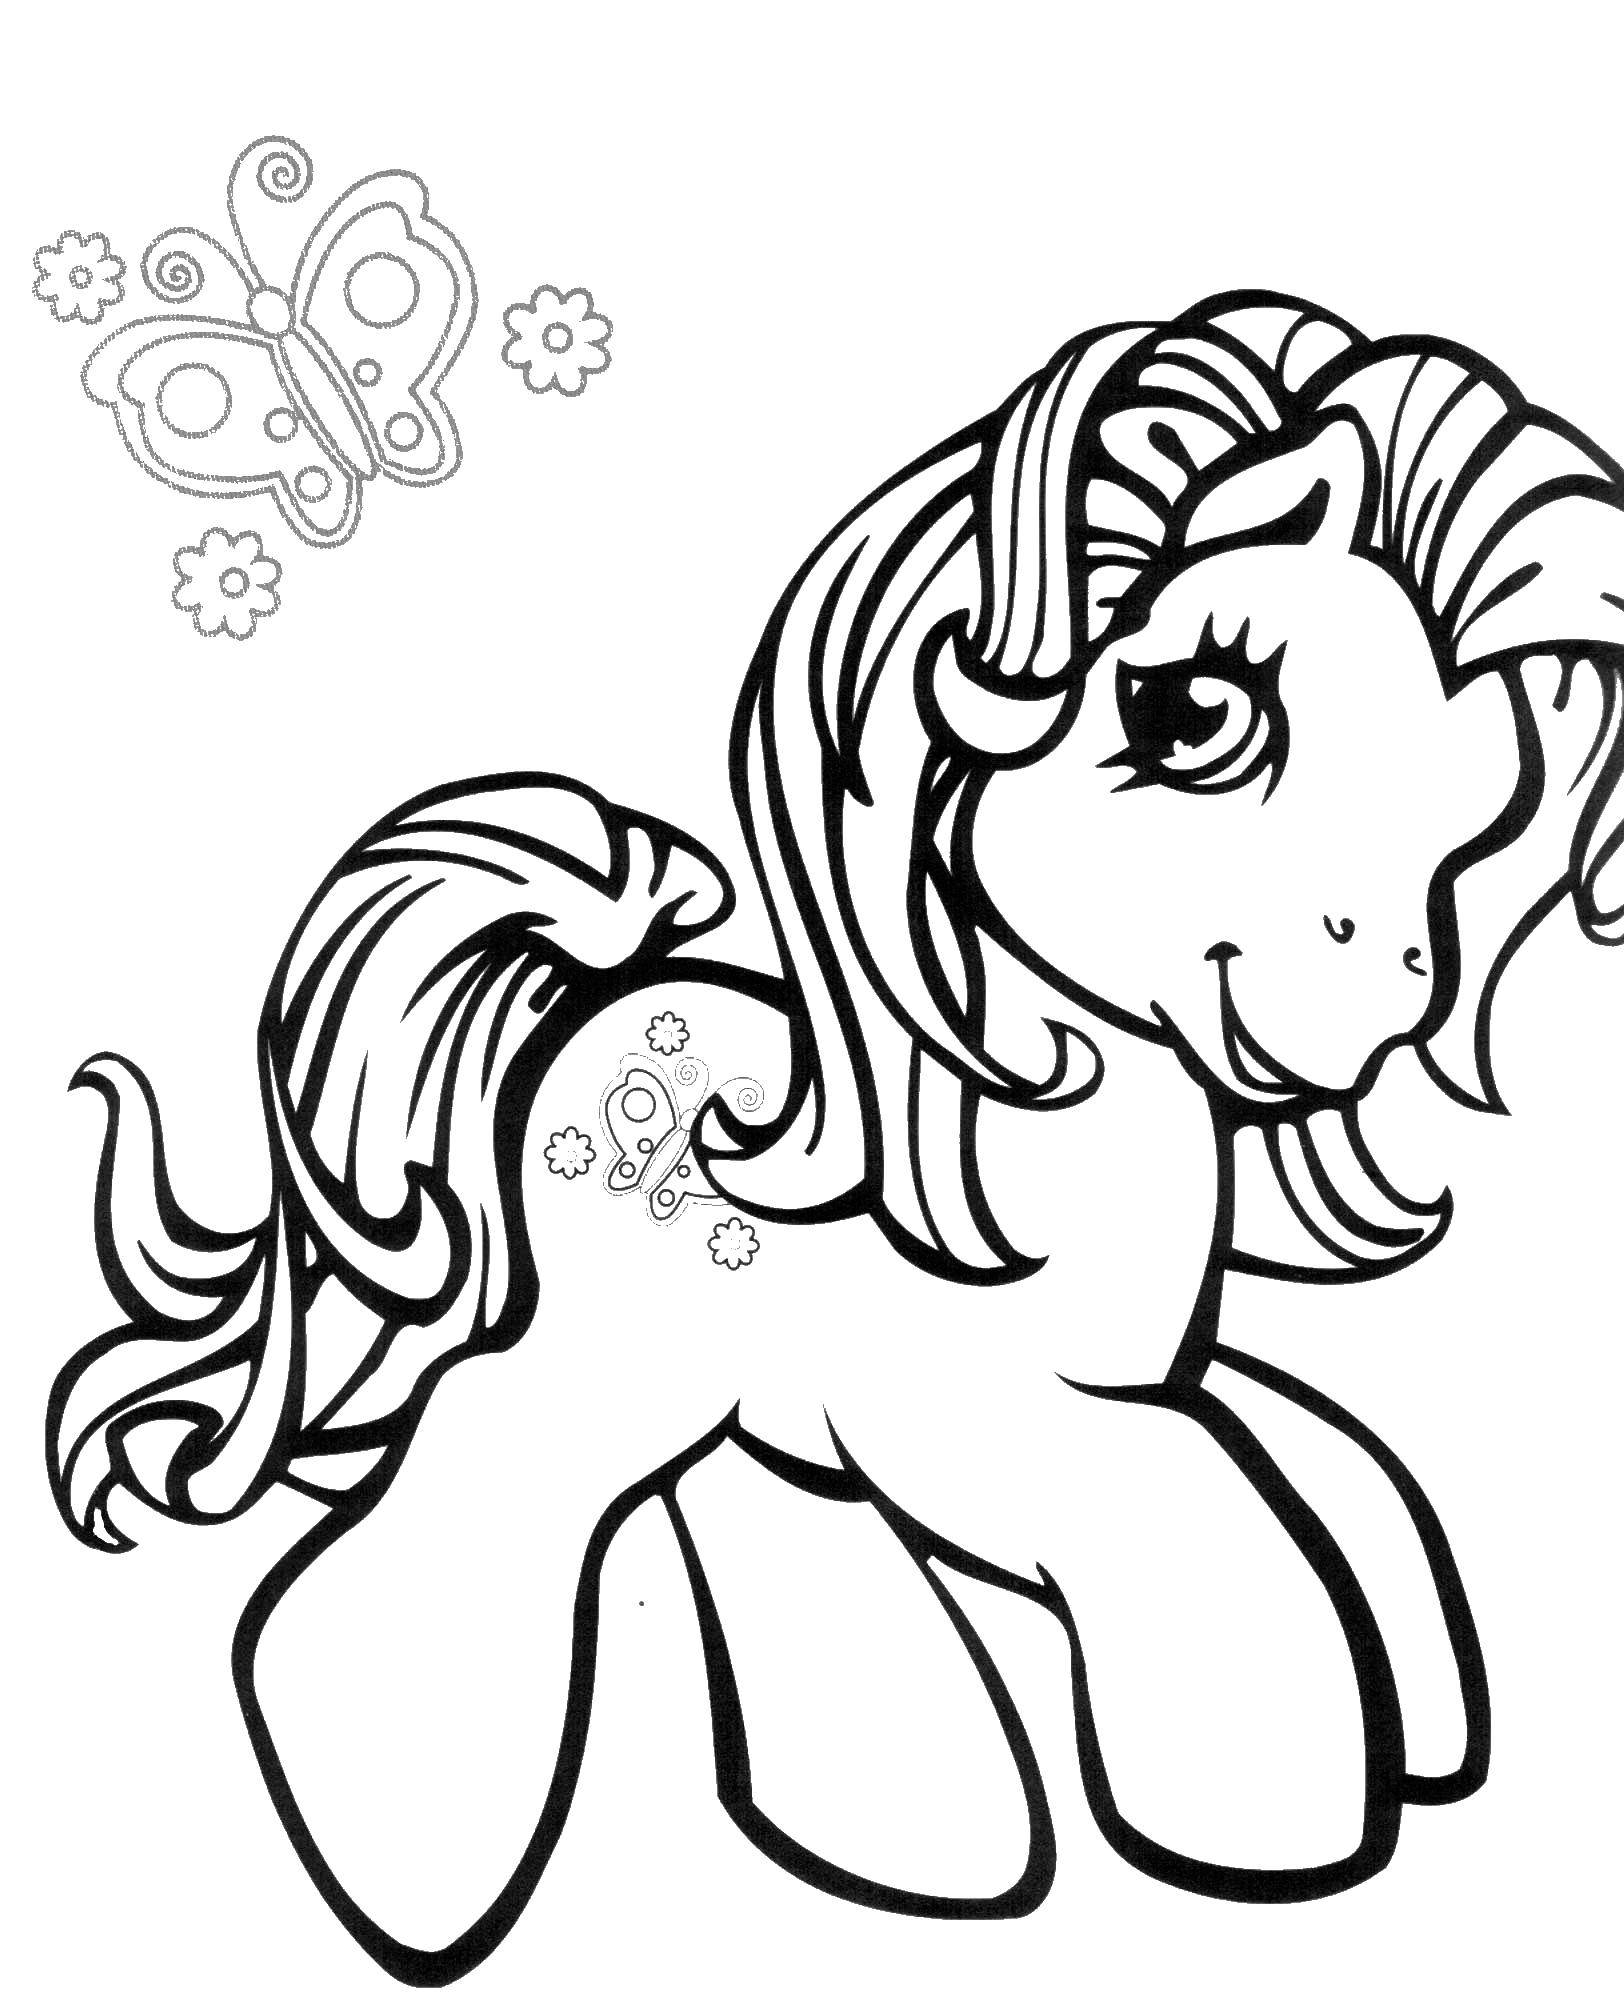 Coloring Pony butterfly. Category Ponies. Tags:  pony, butterfly.